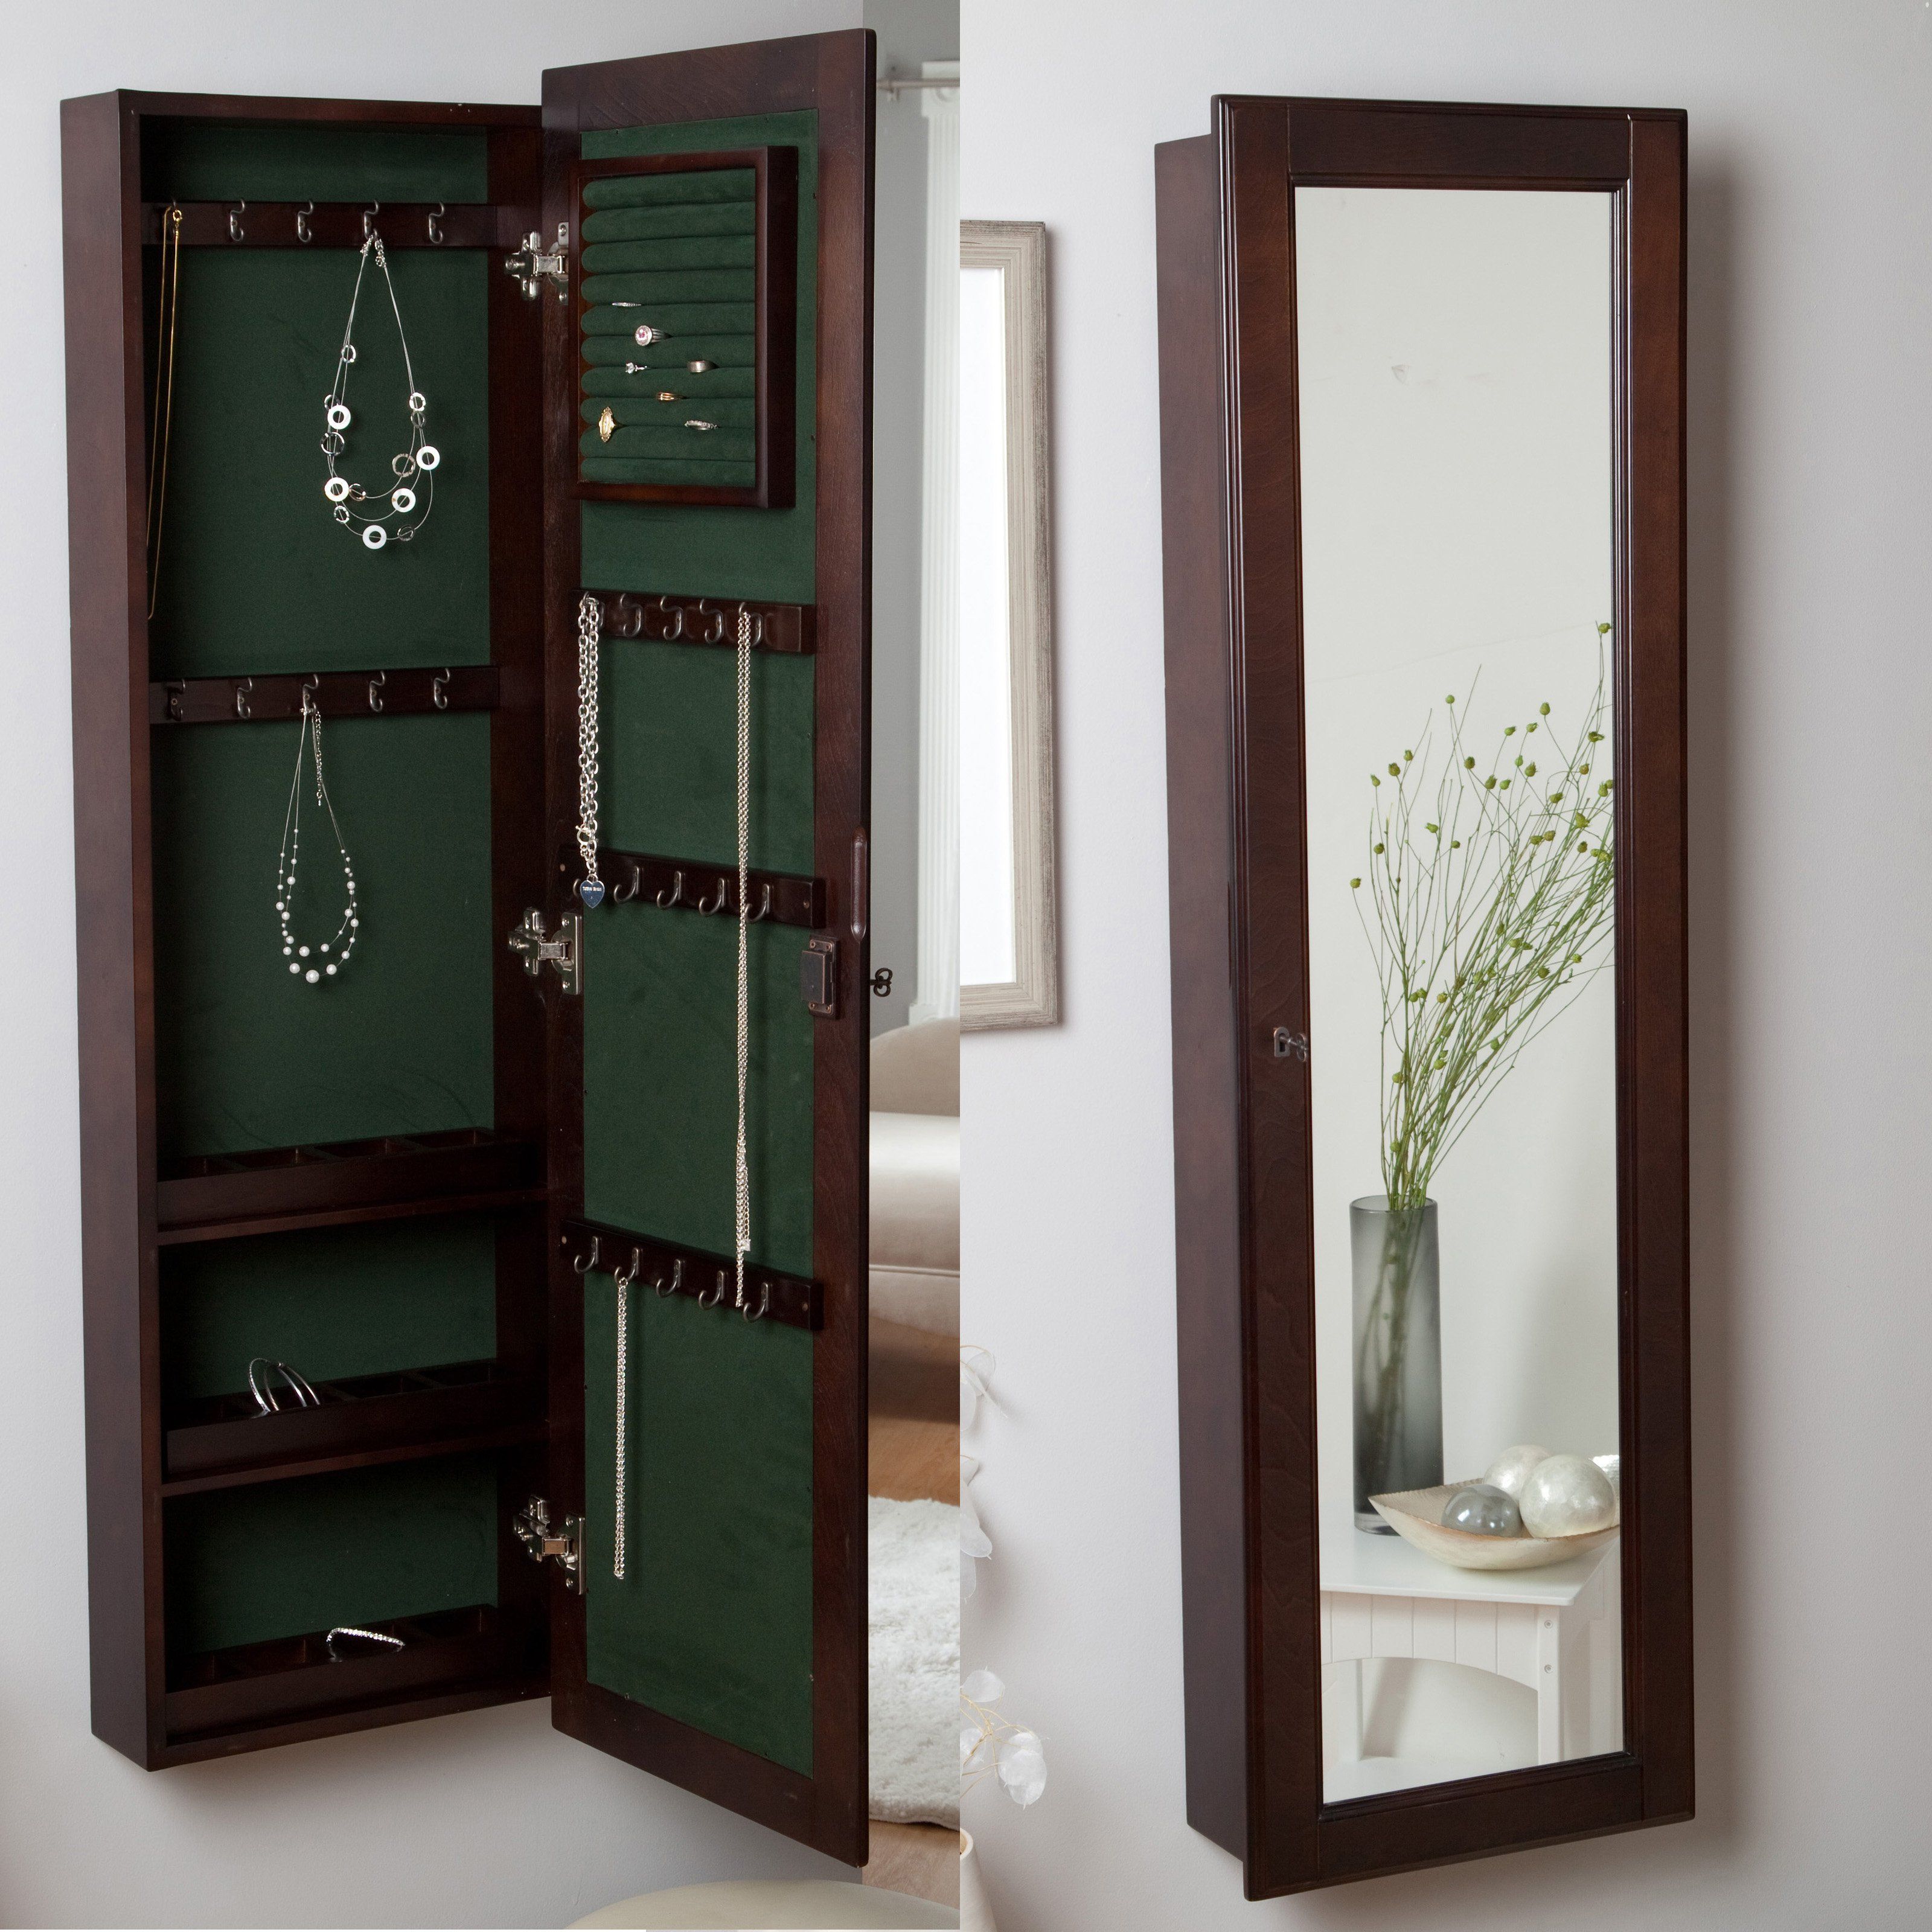 2020 Jewelry Box Wall Mirrors Intended For Wall Mounted Locking Wooden Jewelry Armoire –  (View 6 of 20)